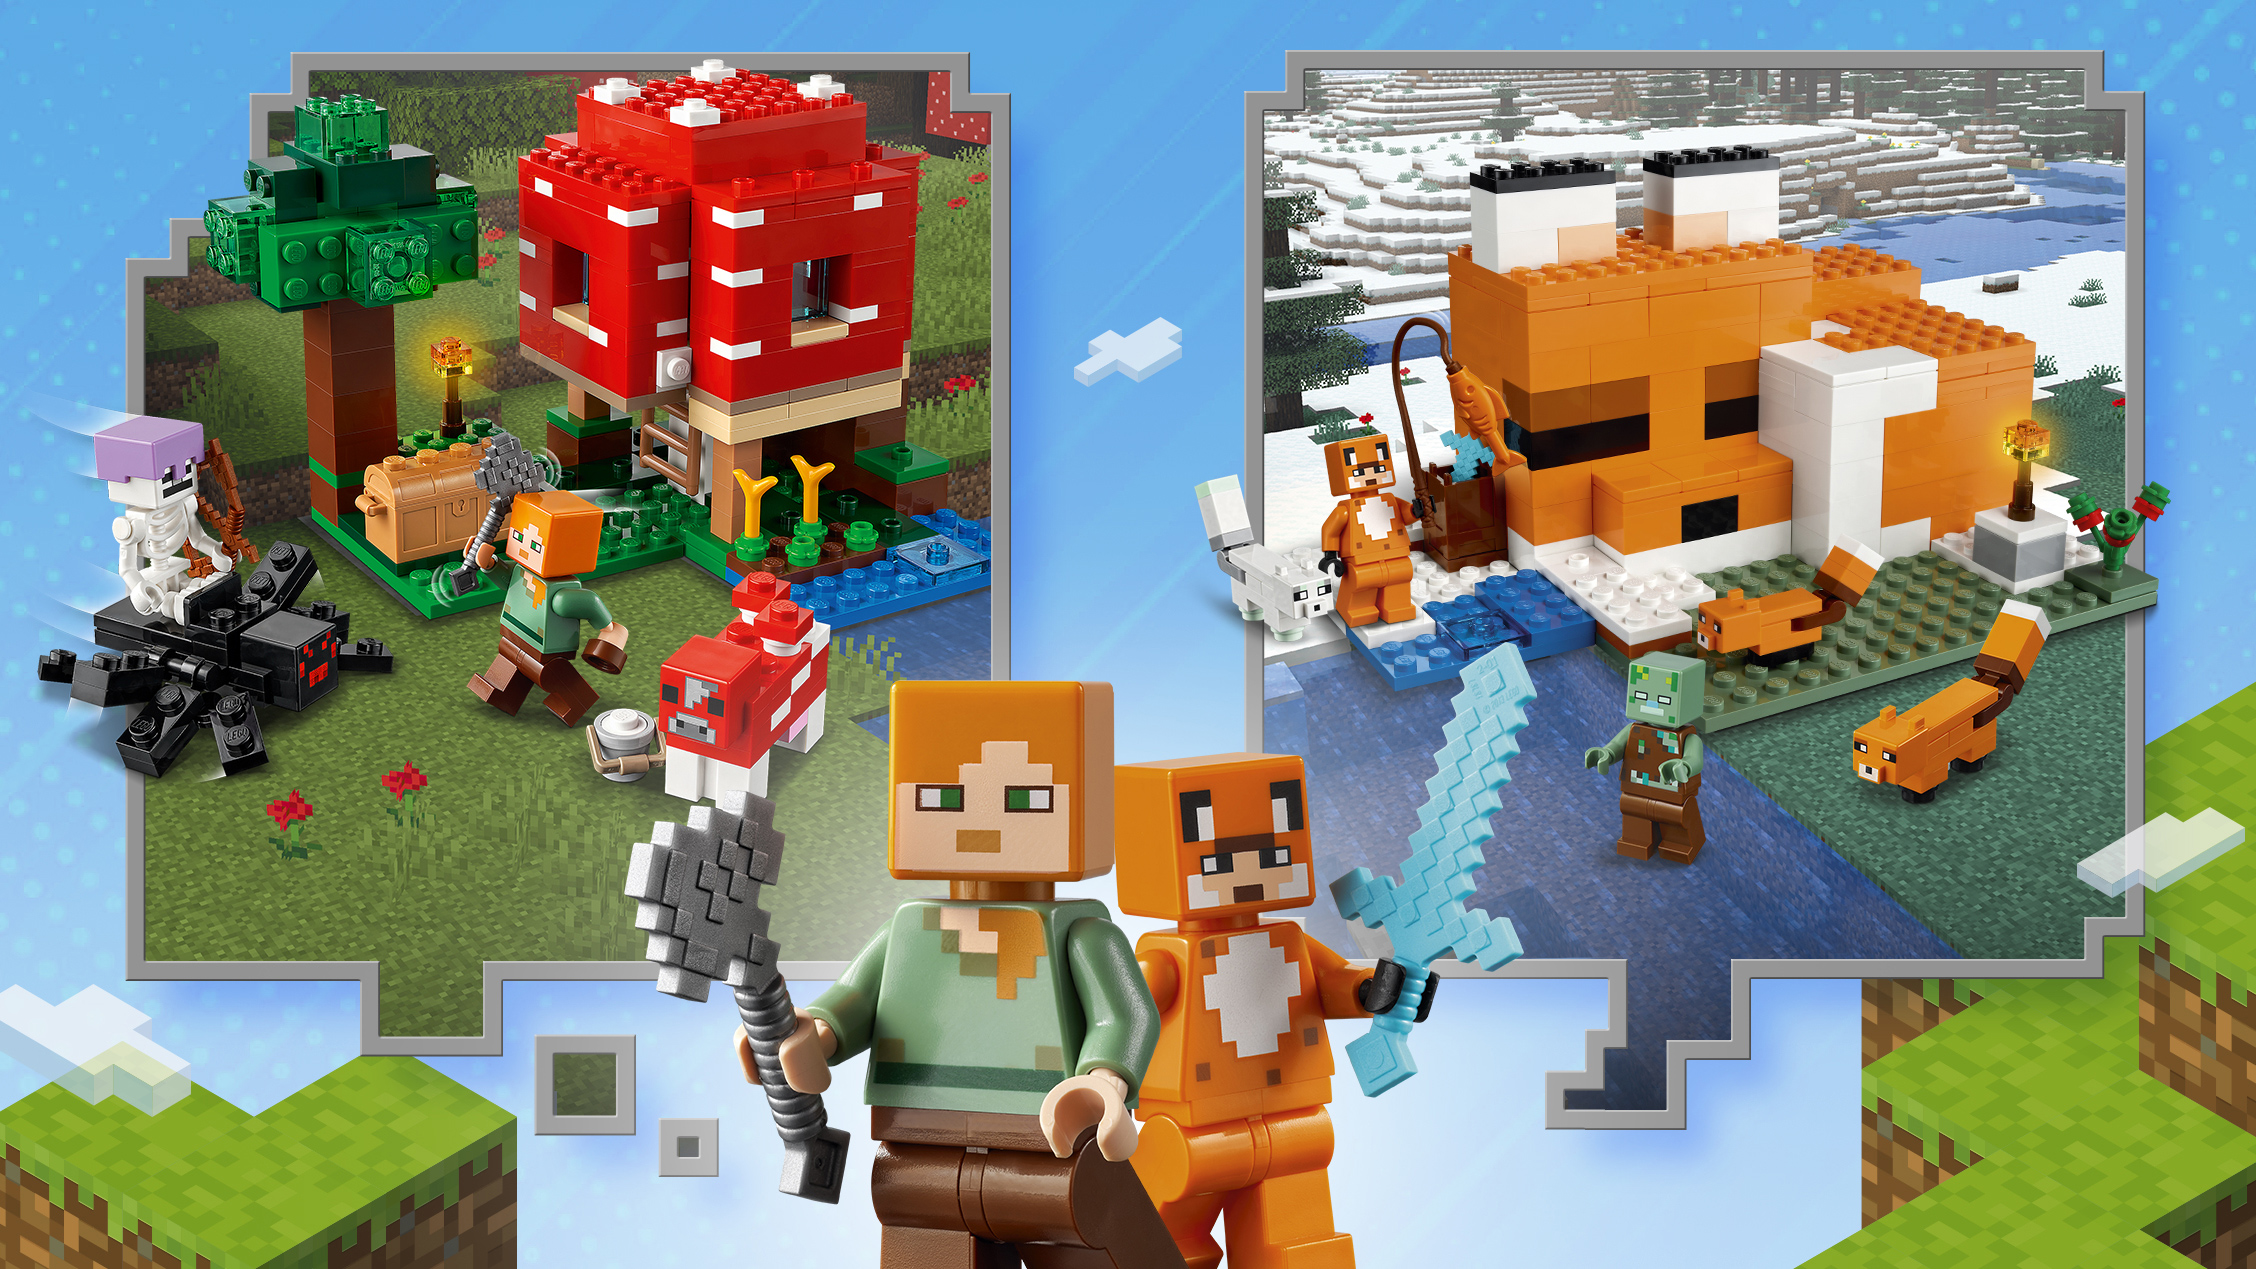 Use Minecraft® skills in the real world - LEGO.com for kids